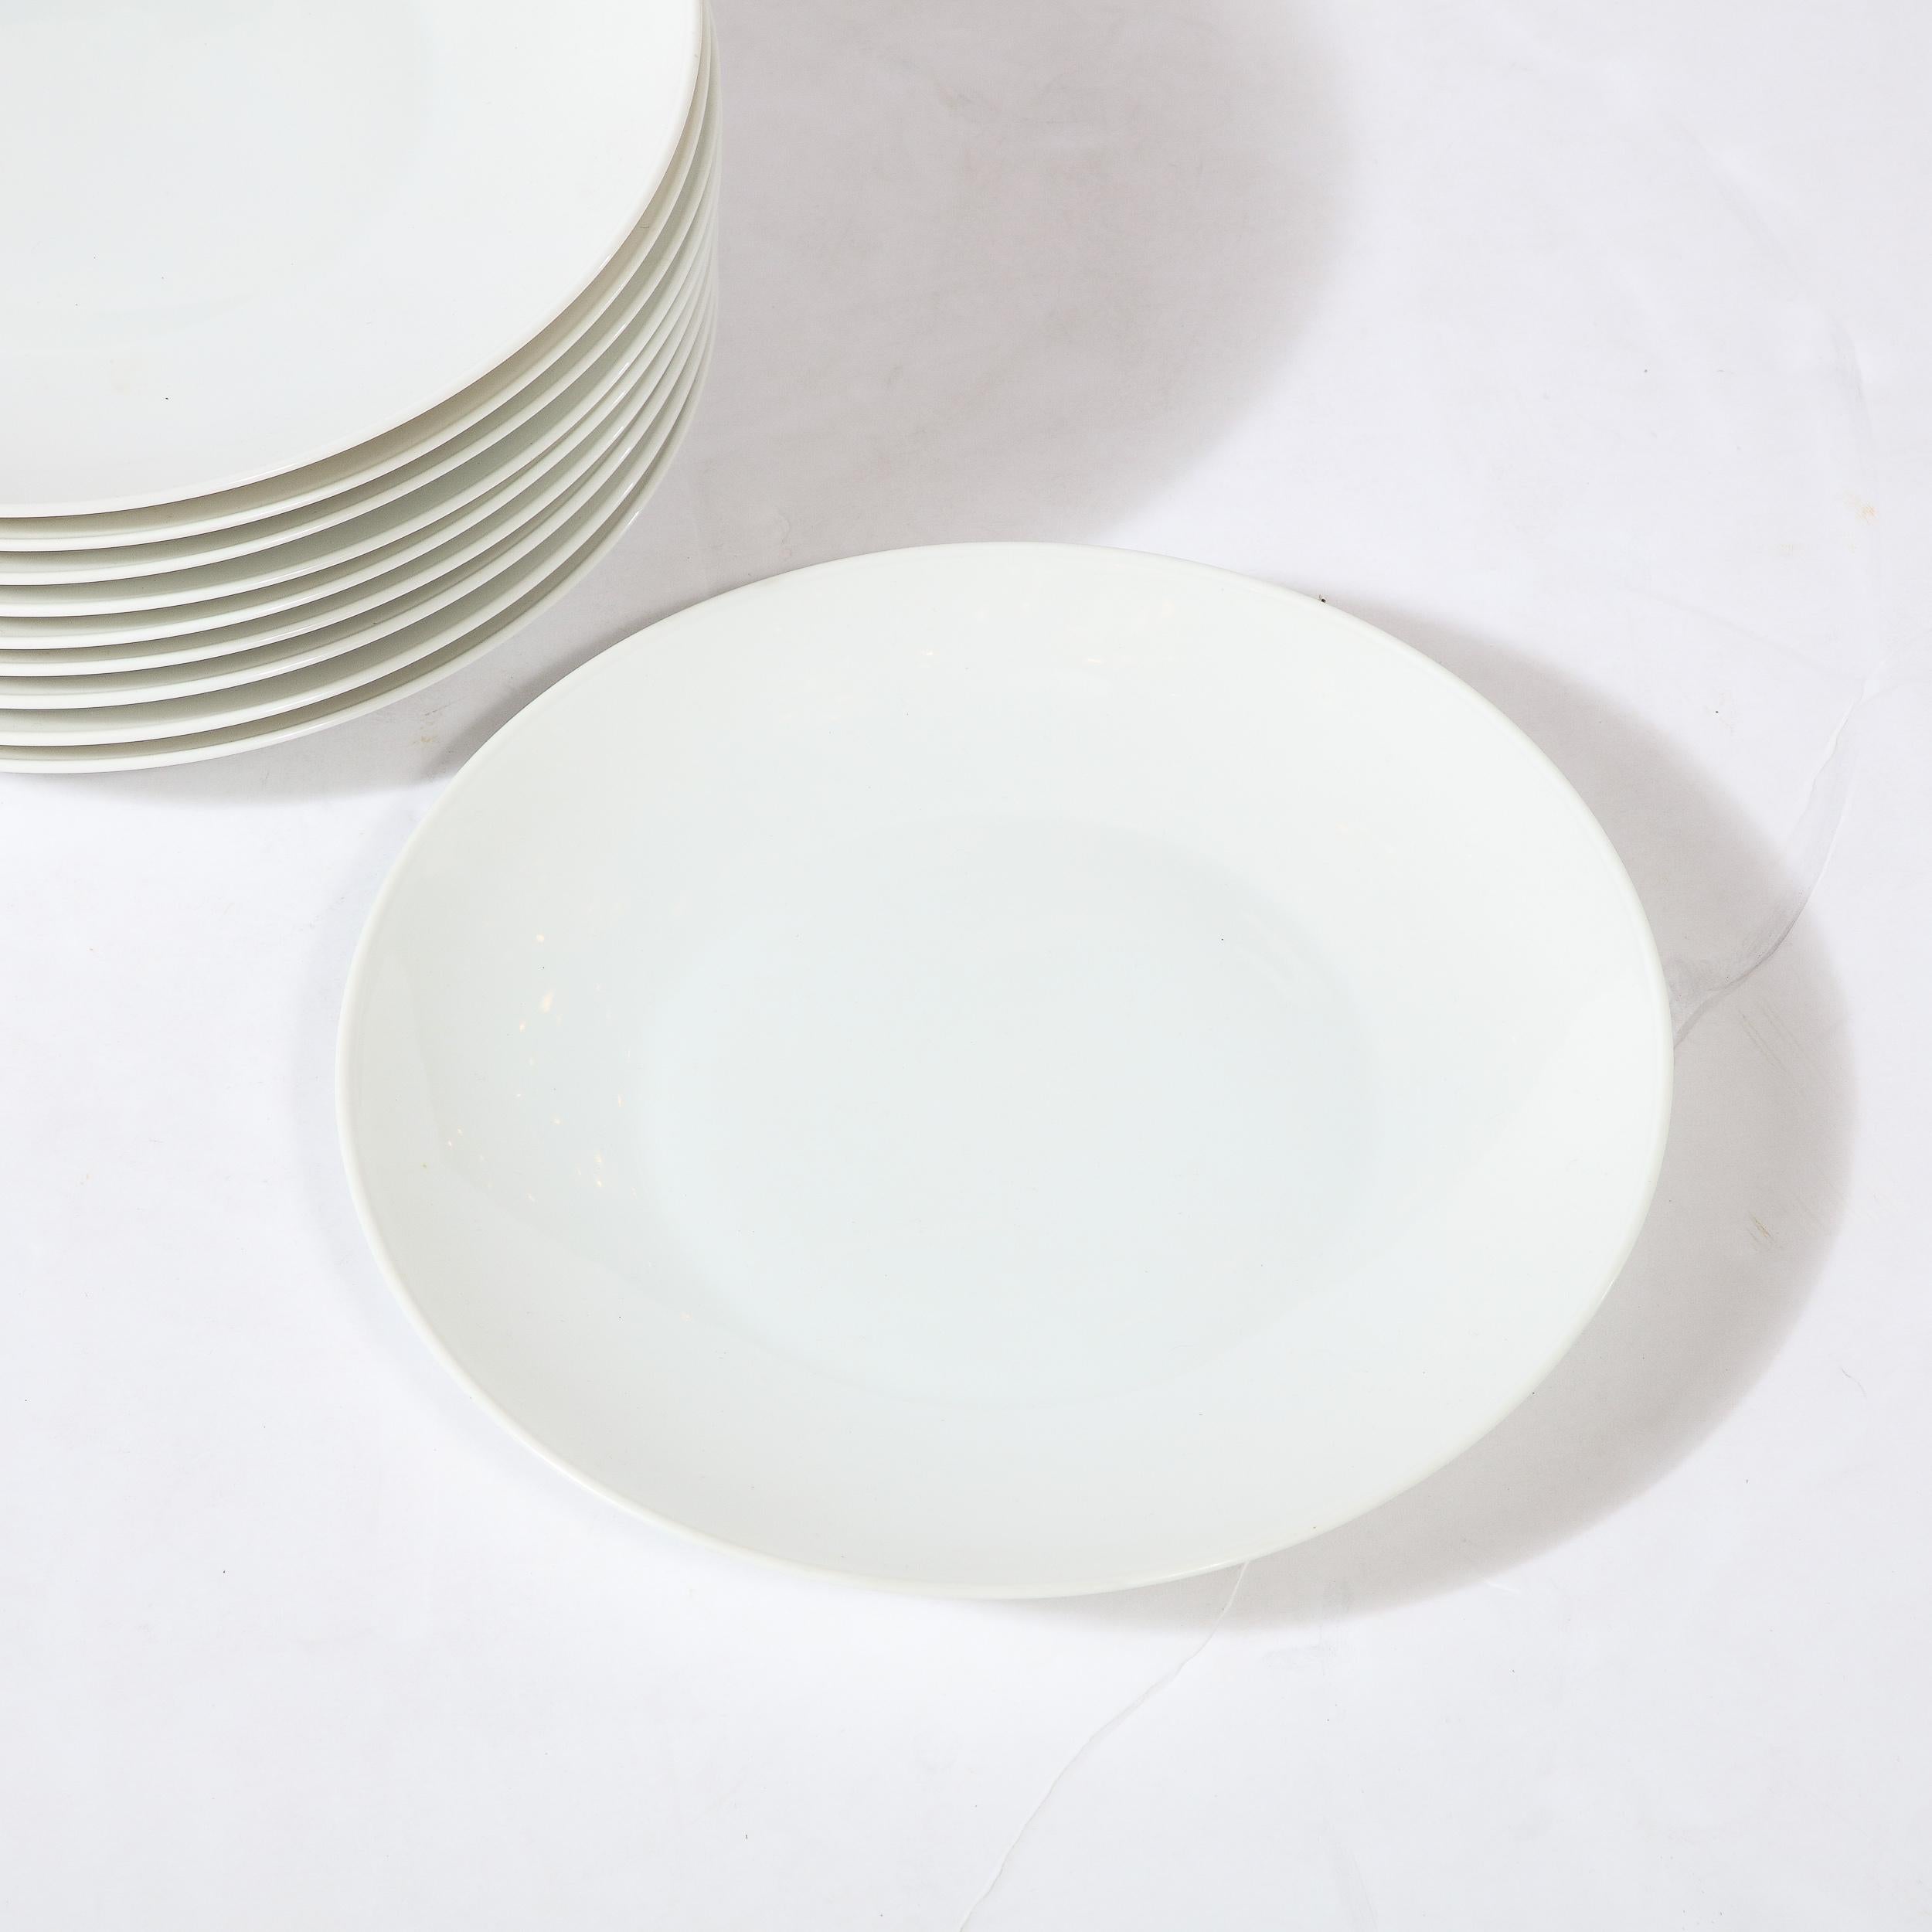 Mid-20th Century Set of Eight Mid-Century Modernist Porcelain Dinner Plates by Rosenthal, Germany